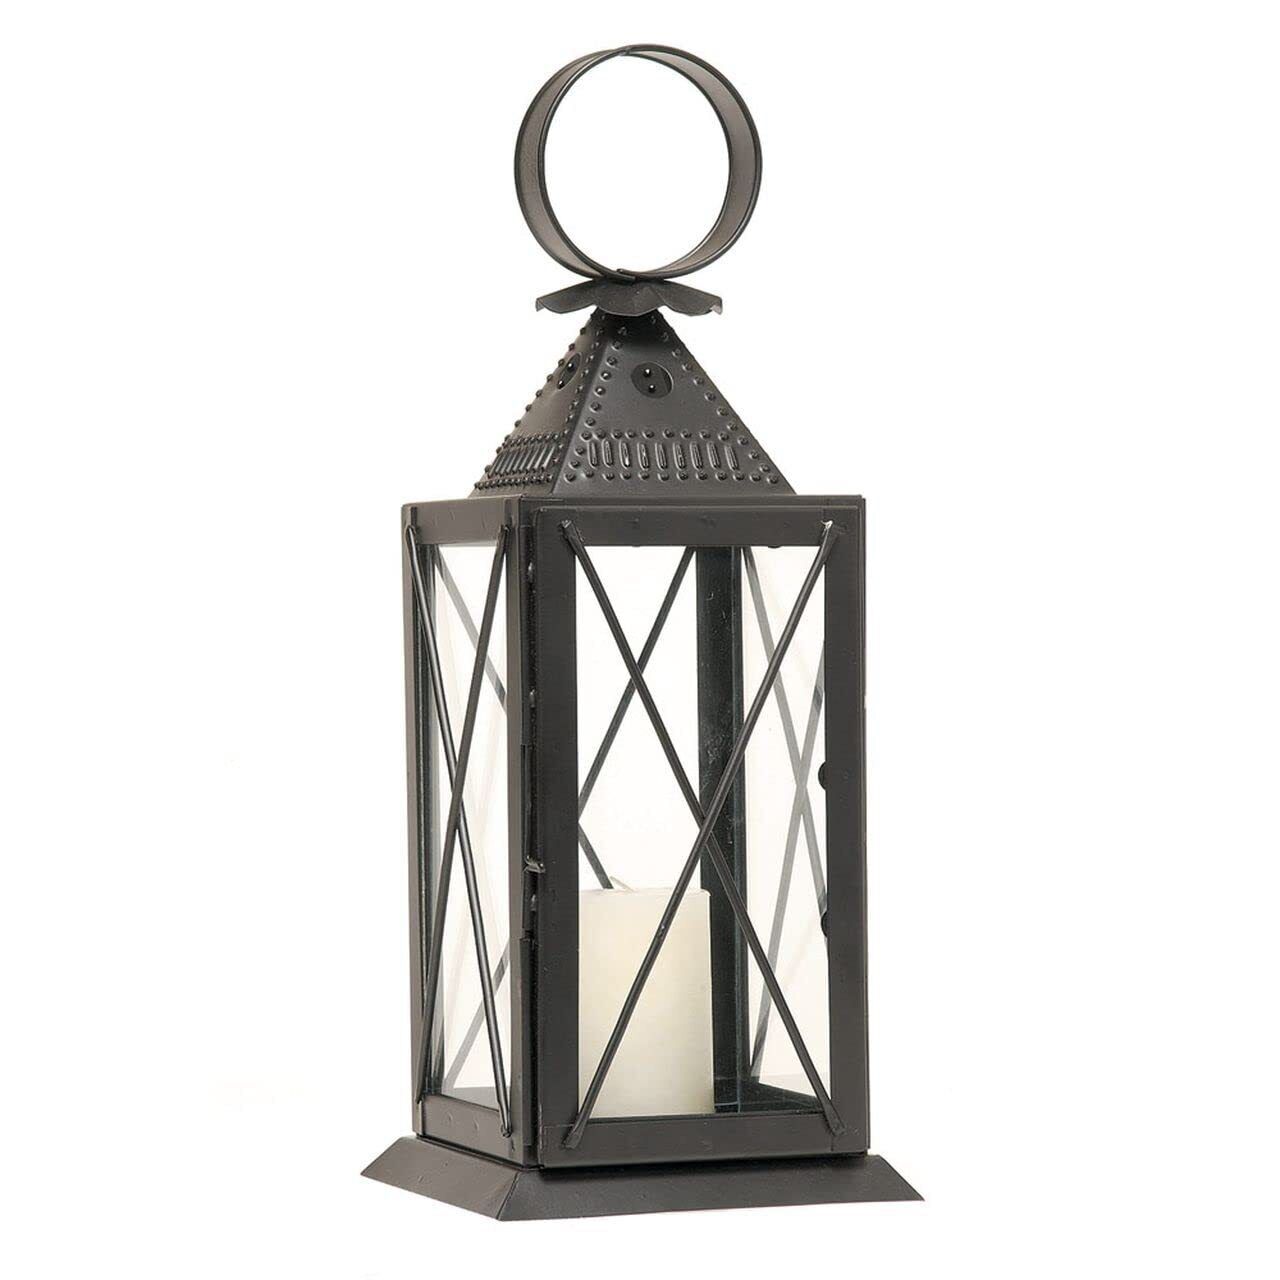 Raleigh Tavern Colonial Style Lantern for Candle or LED